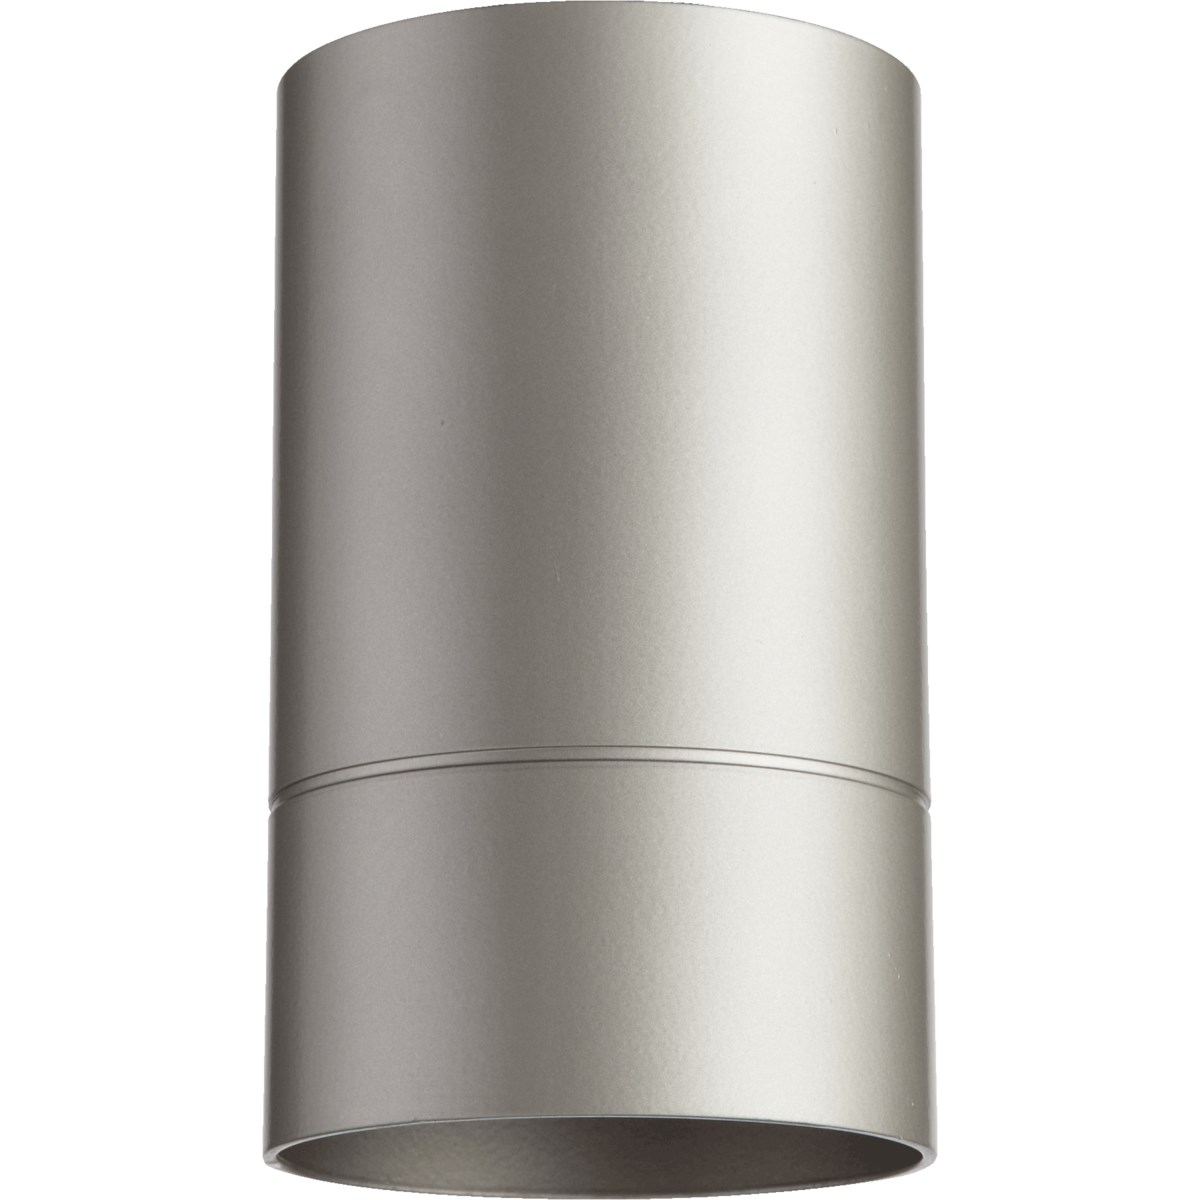 Cylinder 7 Inch Ceiling Mount Graphite